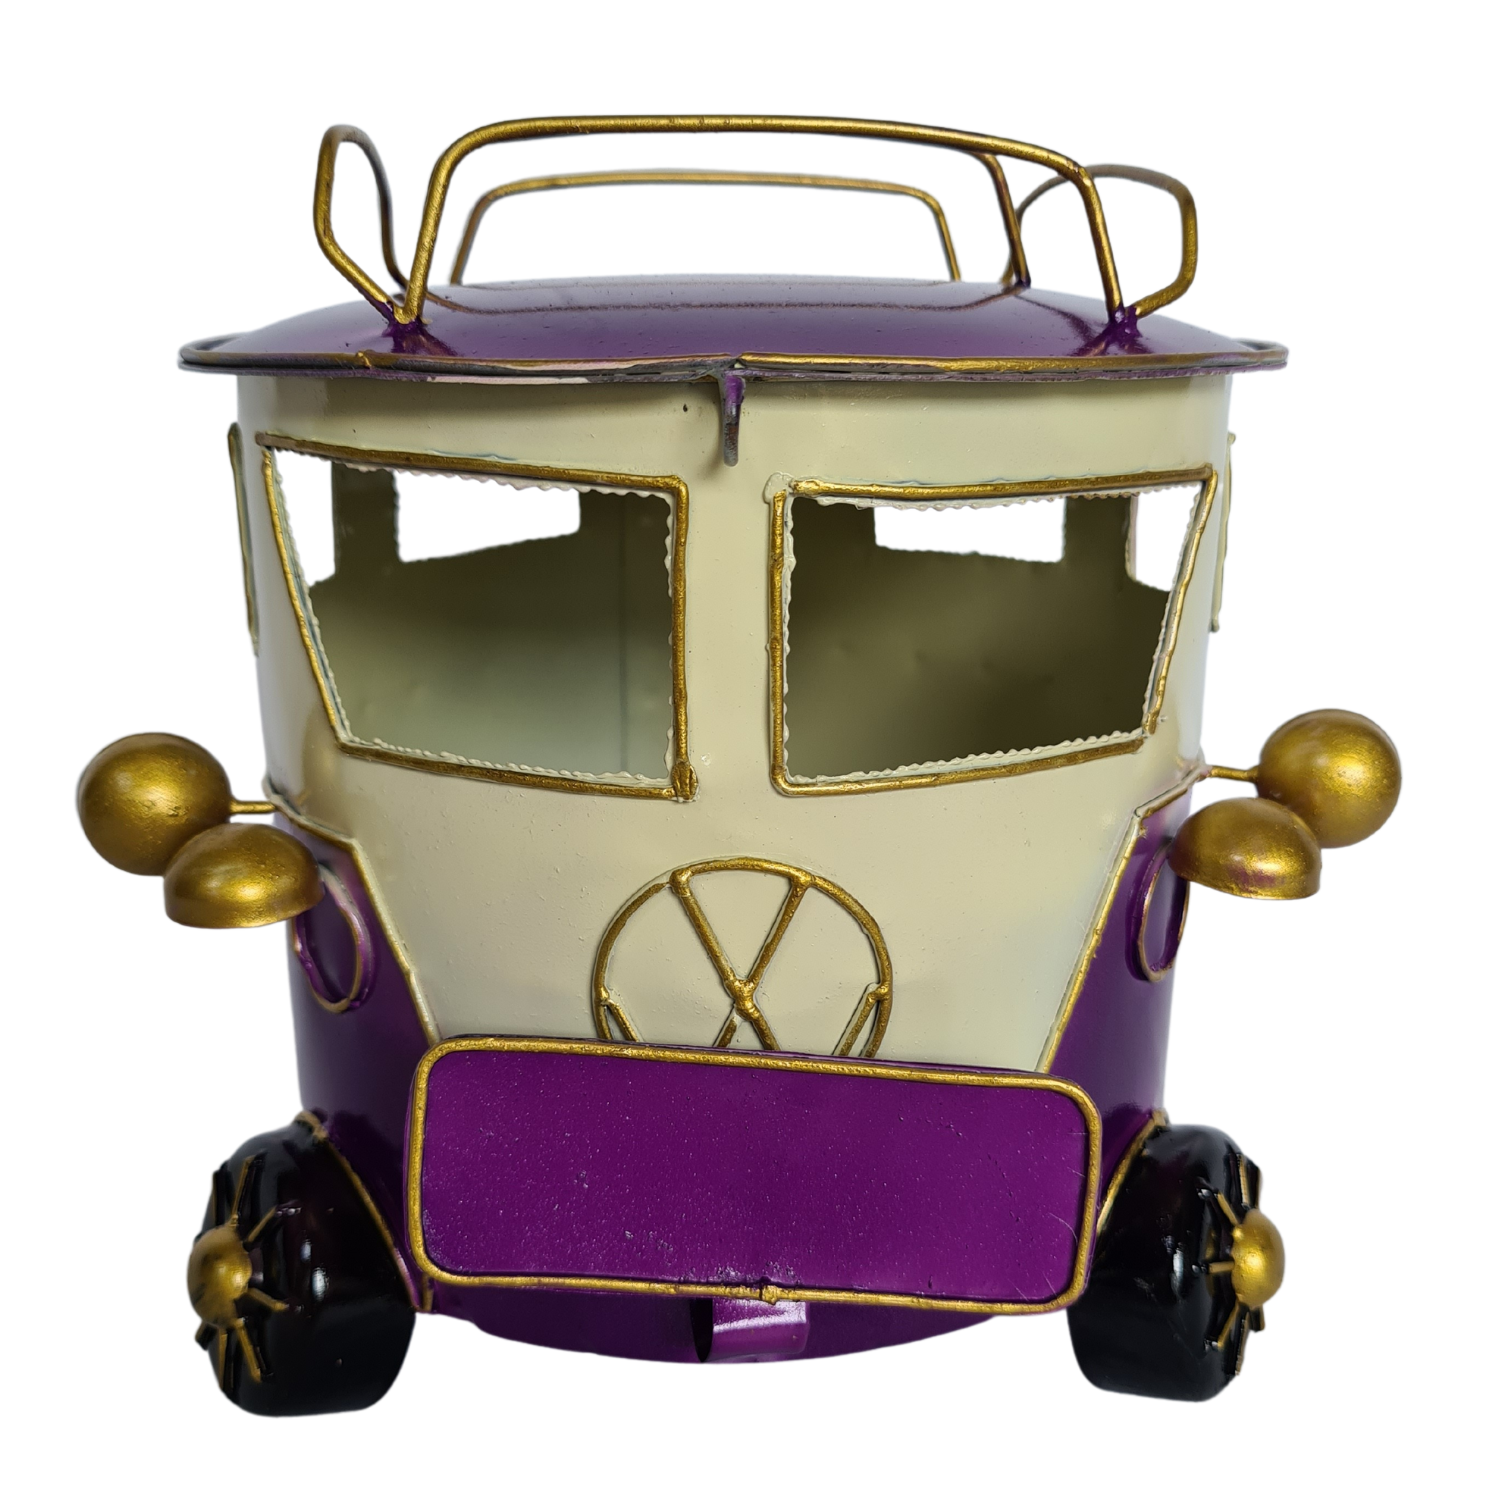 Mosquito coil holder as a funkie VW Combi in purple colour